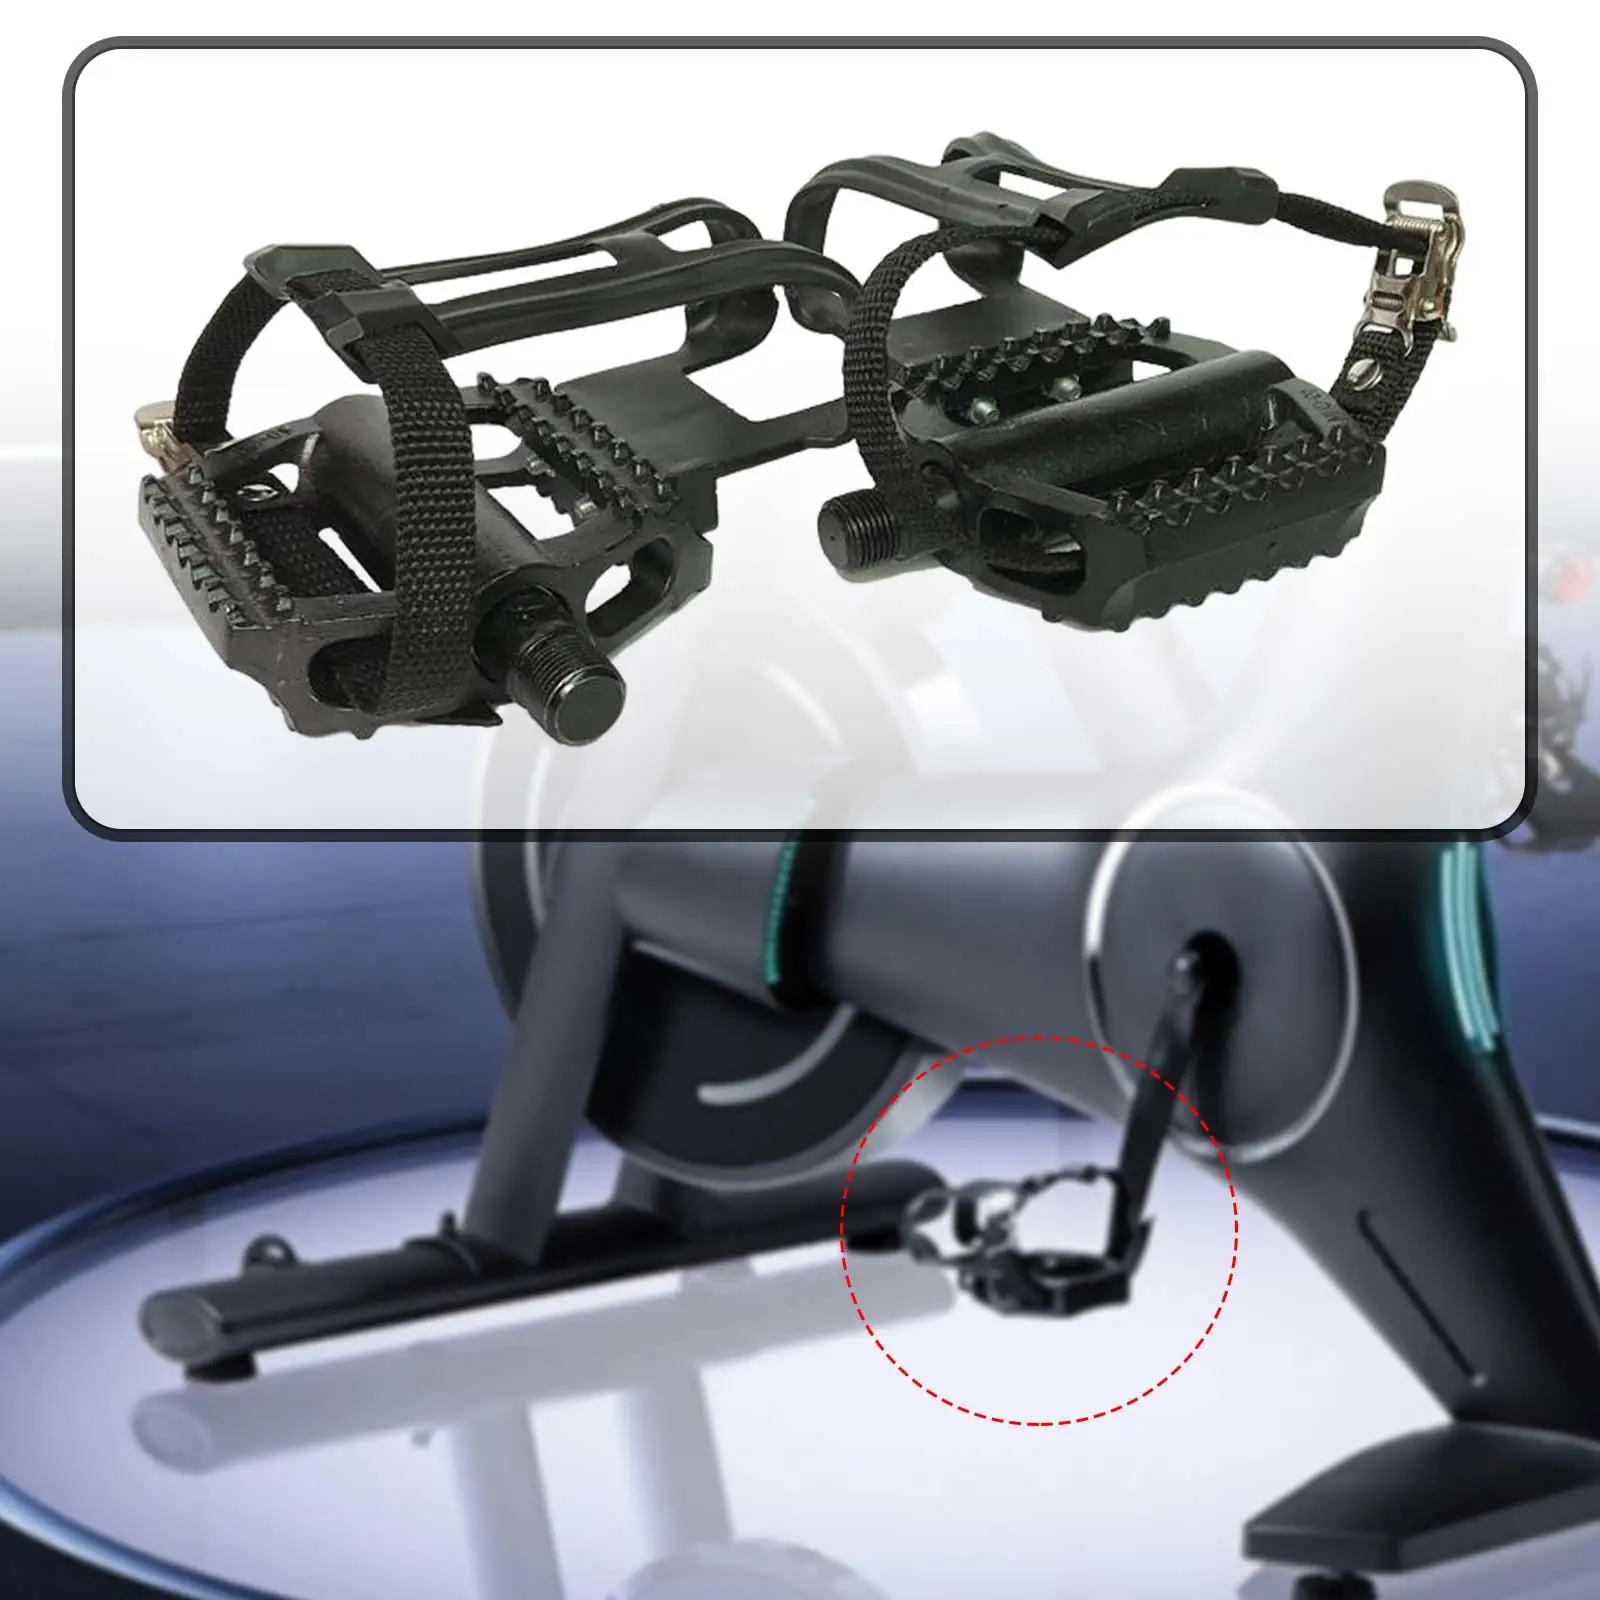 Exercise Bike Pedals with Toe Cages Nonslip with Straps 18mm Spindle for Cycling Accessories